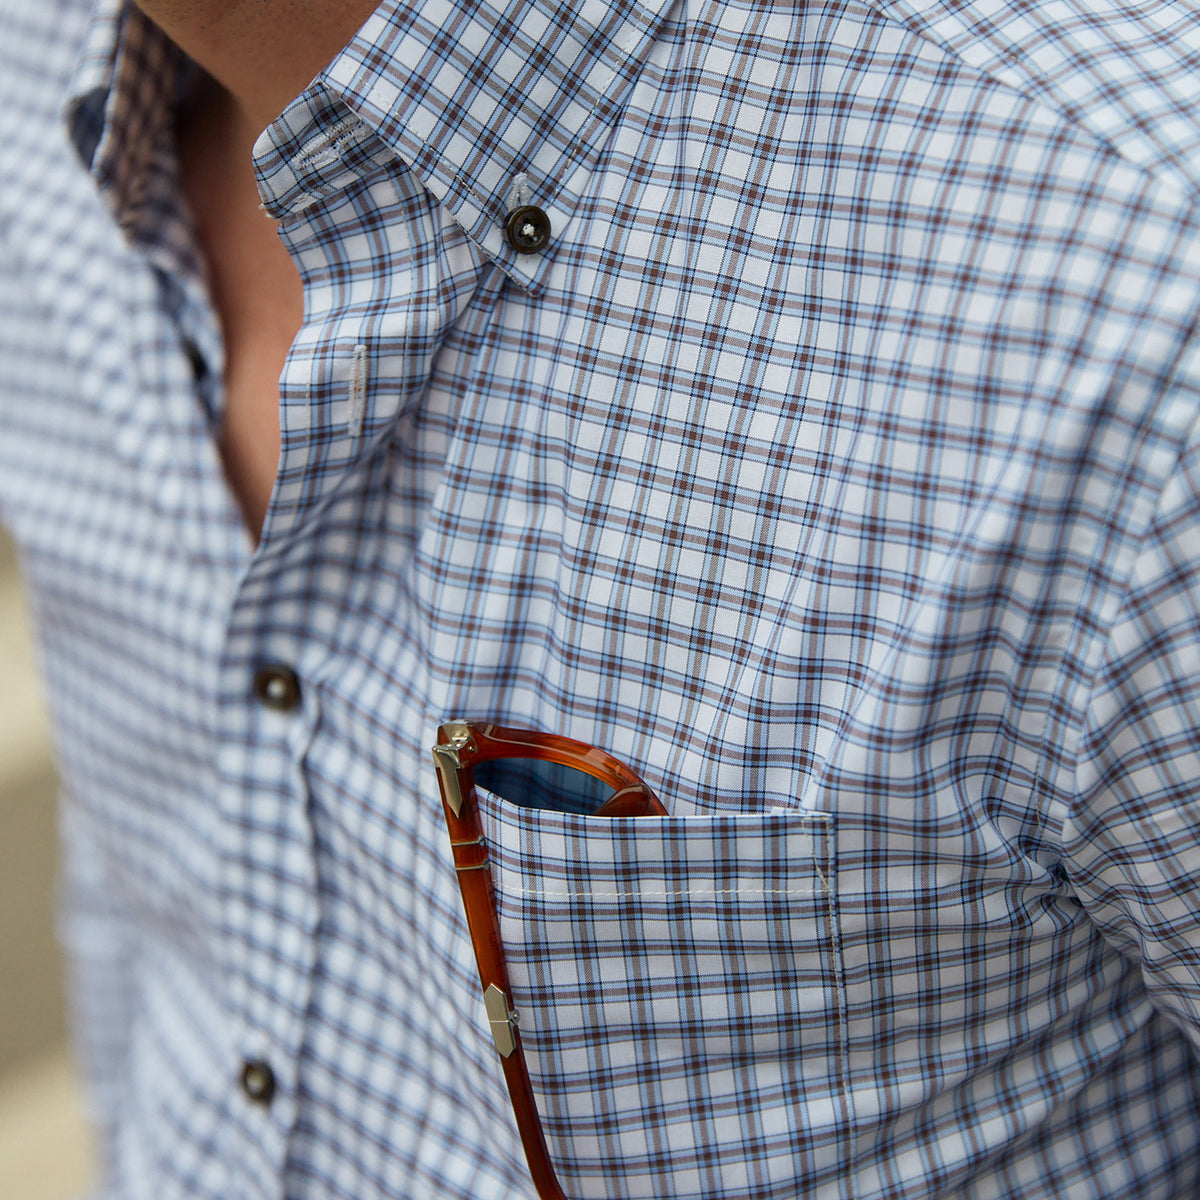 Enjoy the luxury of 100% cotton, Italian made quality, and eye-catching blue and brown graph check.  100% Cotton • Button Down Collar • Long Sleeve • Contrast Buttons • Chest Pocket • Machine Washable • Made in Italy